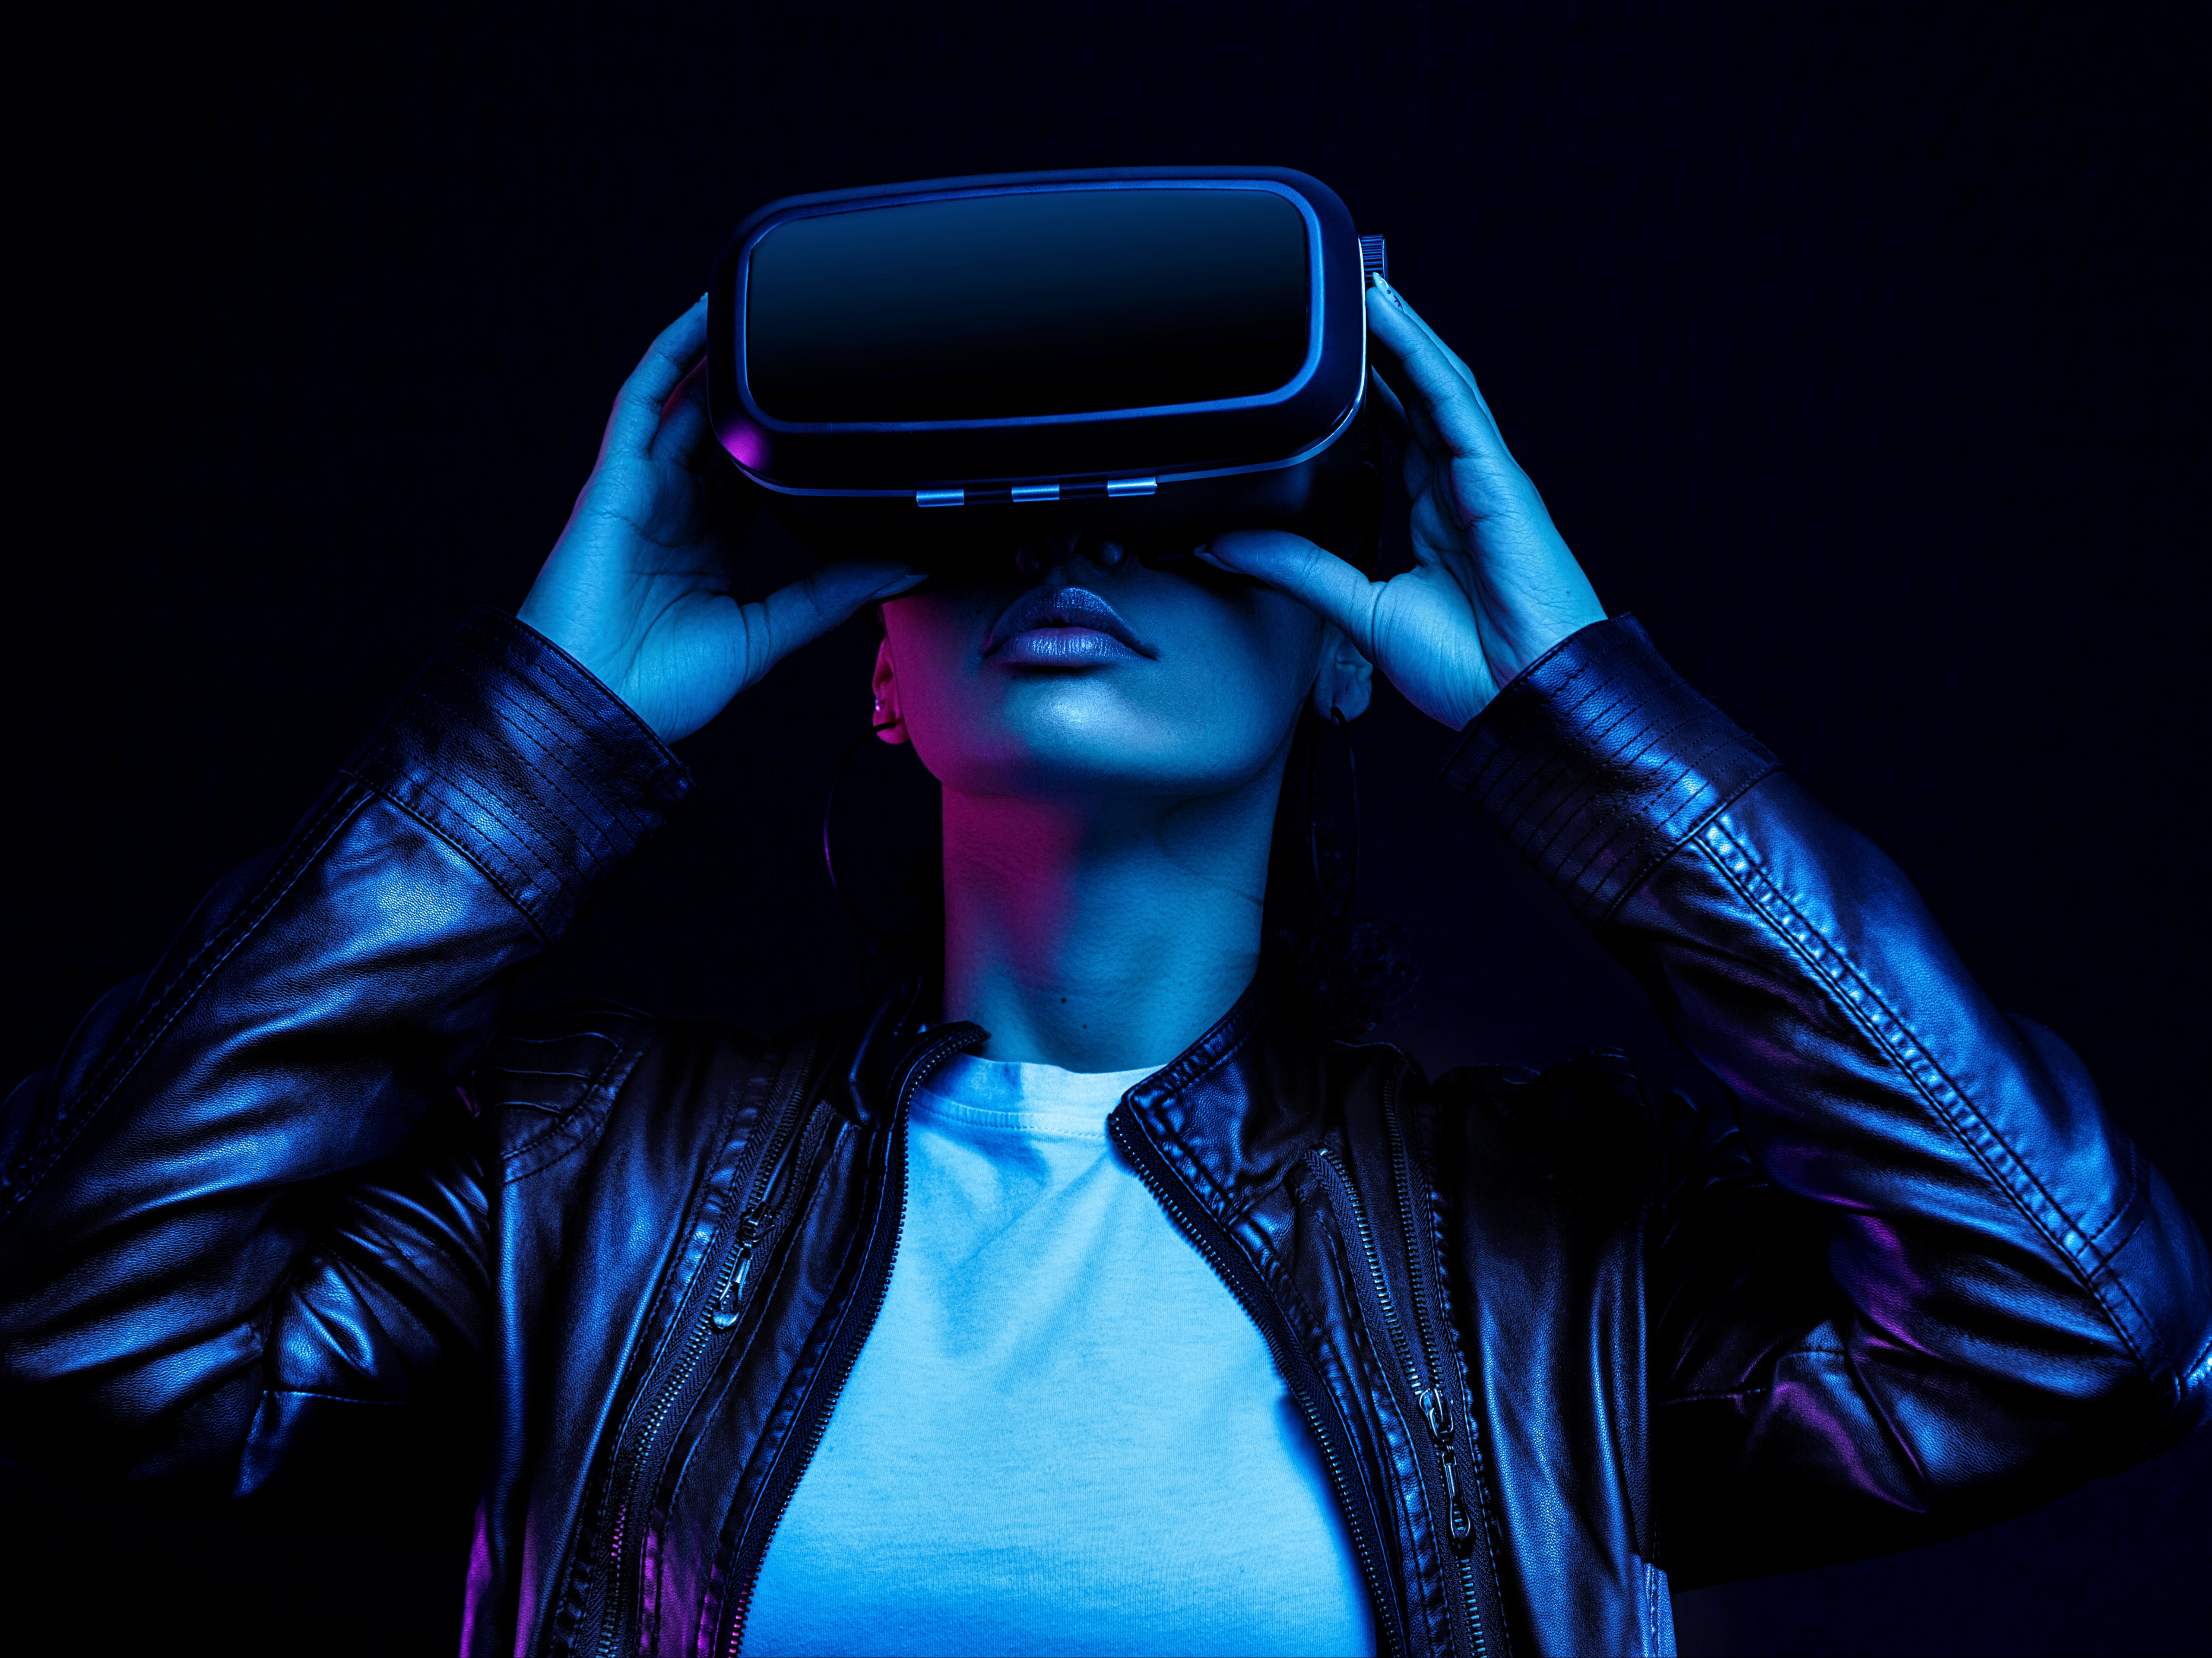 Metaverse evangelists believe most of us will soon be spending much of our time connected to persistent virtual worlds